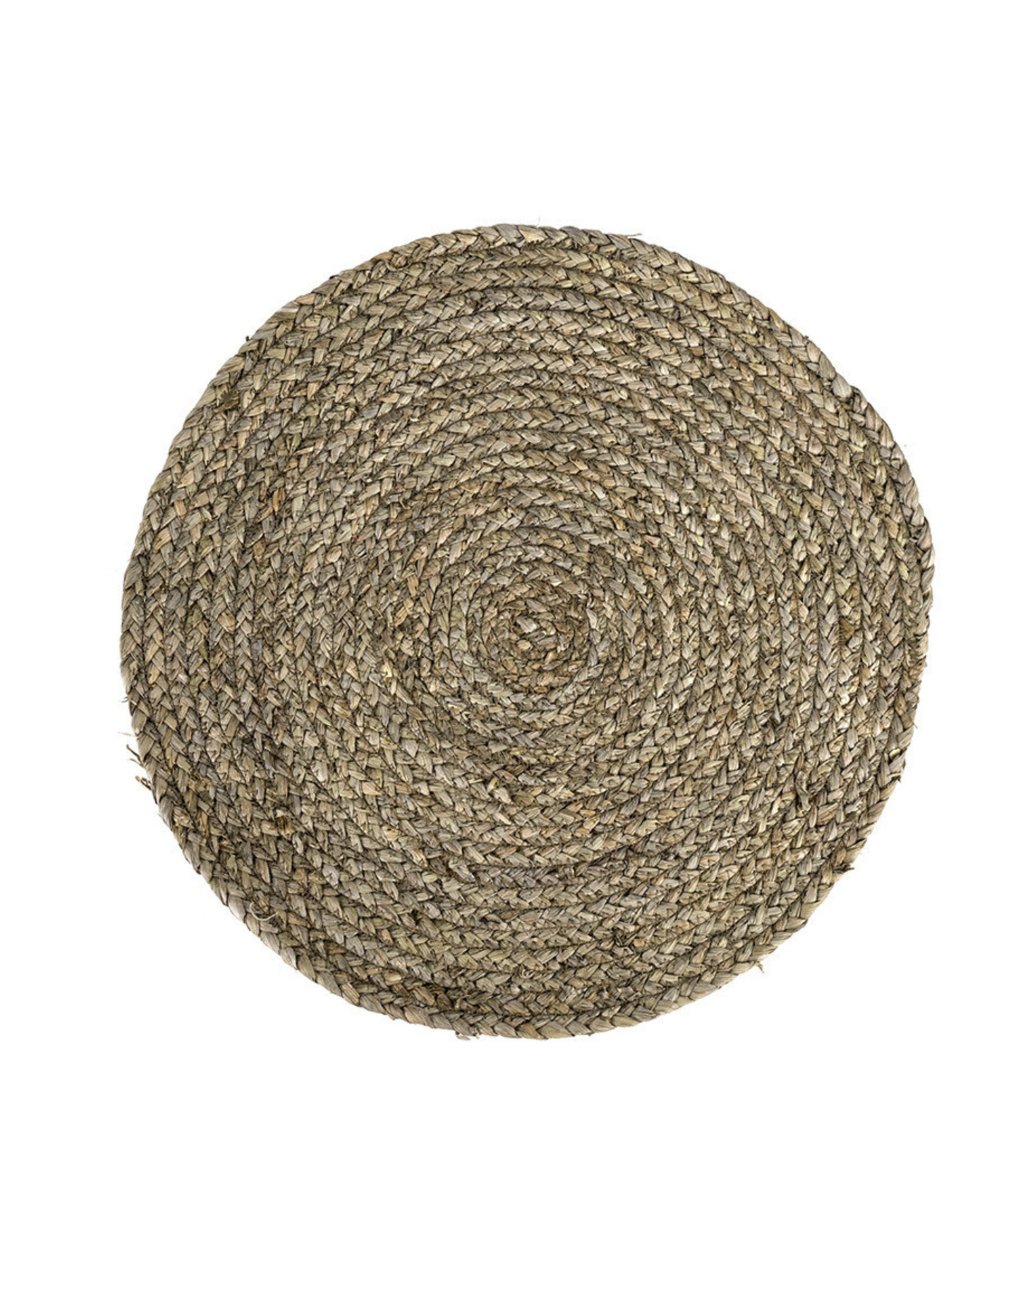 MAIZE ROUND PLACEMAT Dining-Kitchenware Indaba trading co   